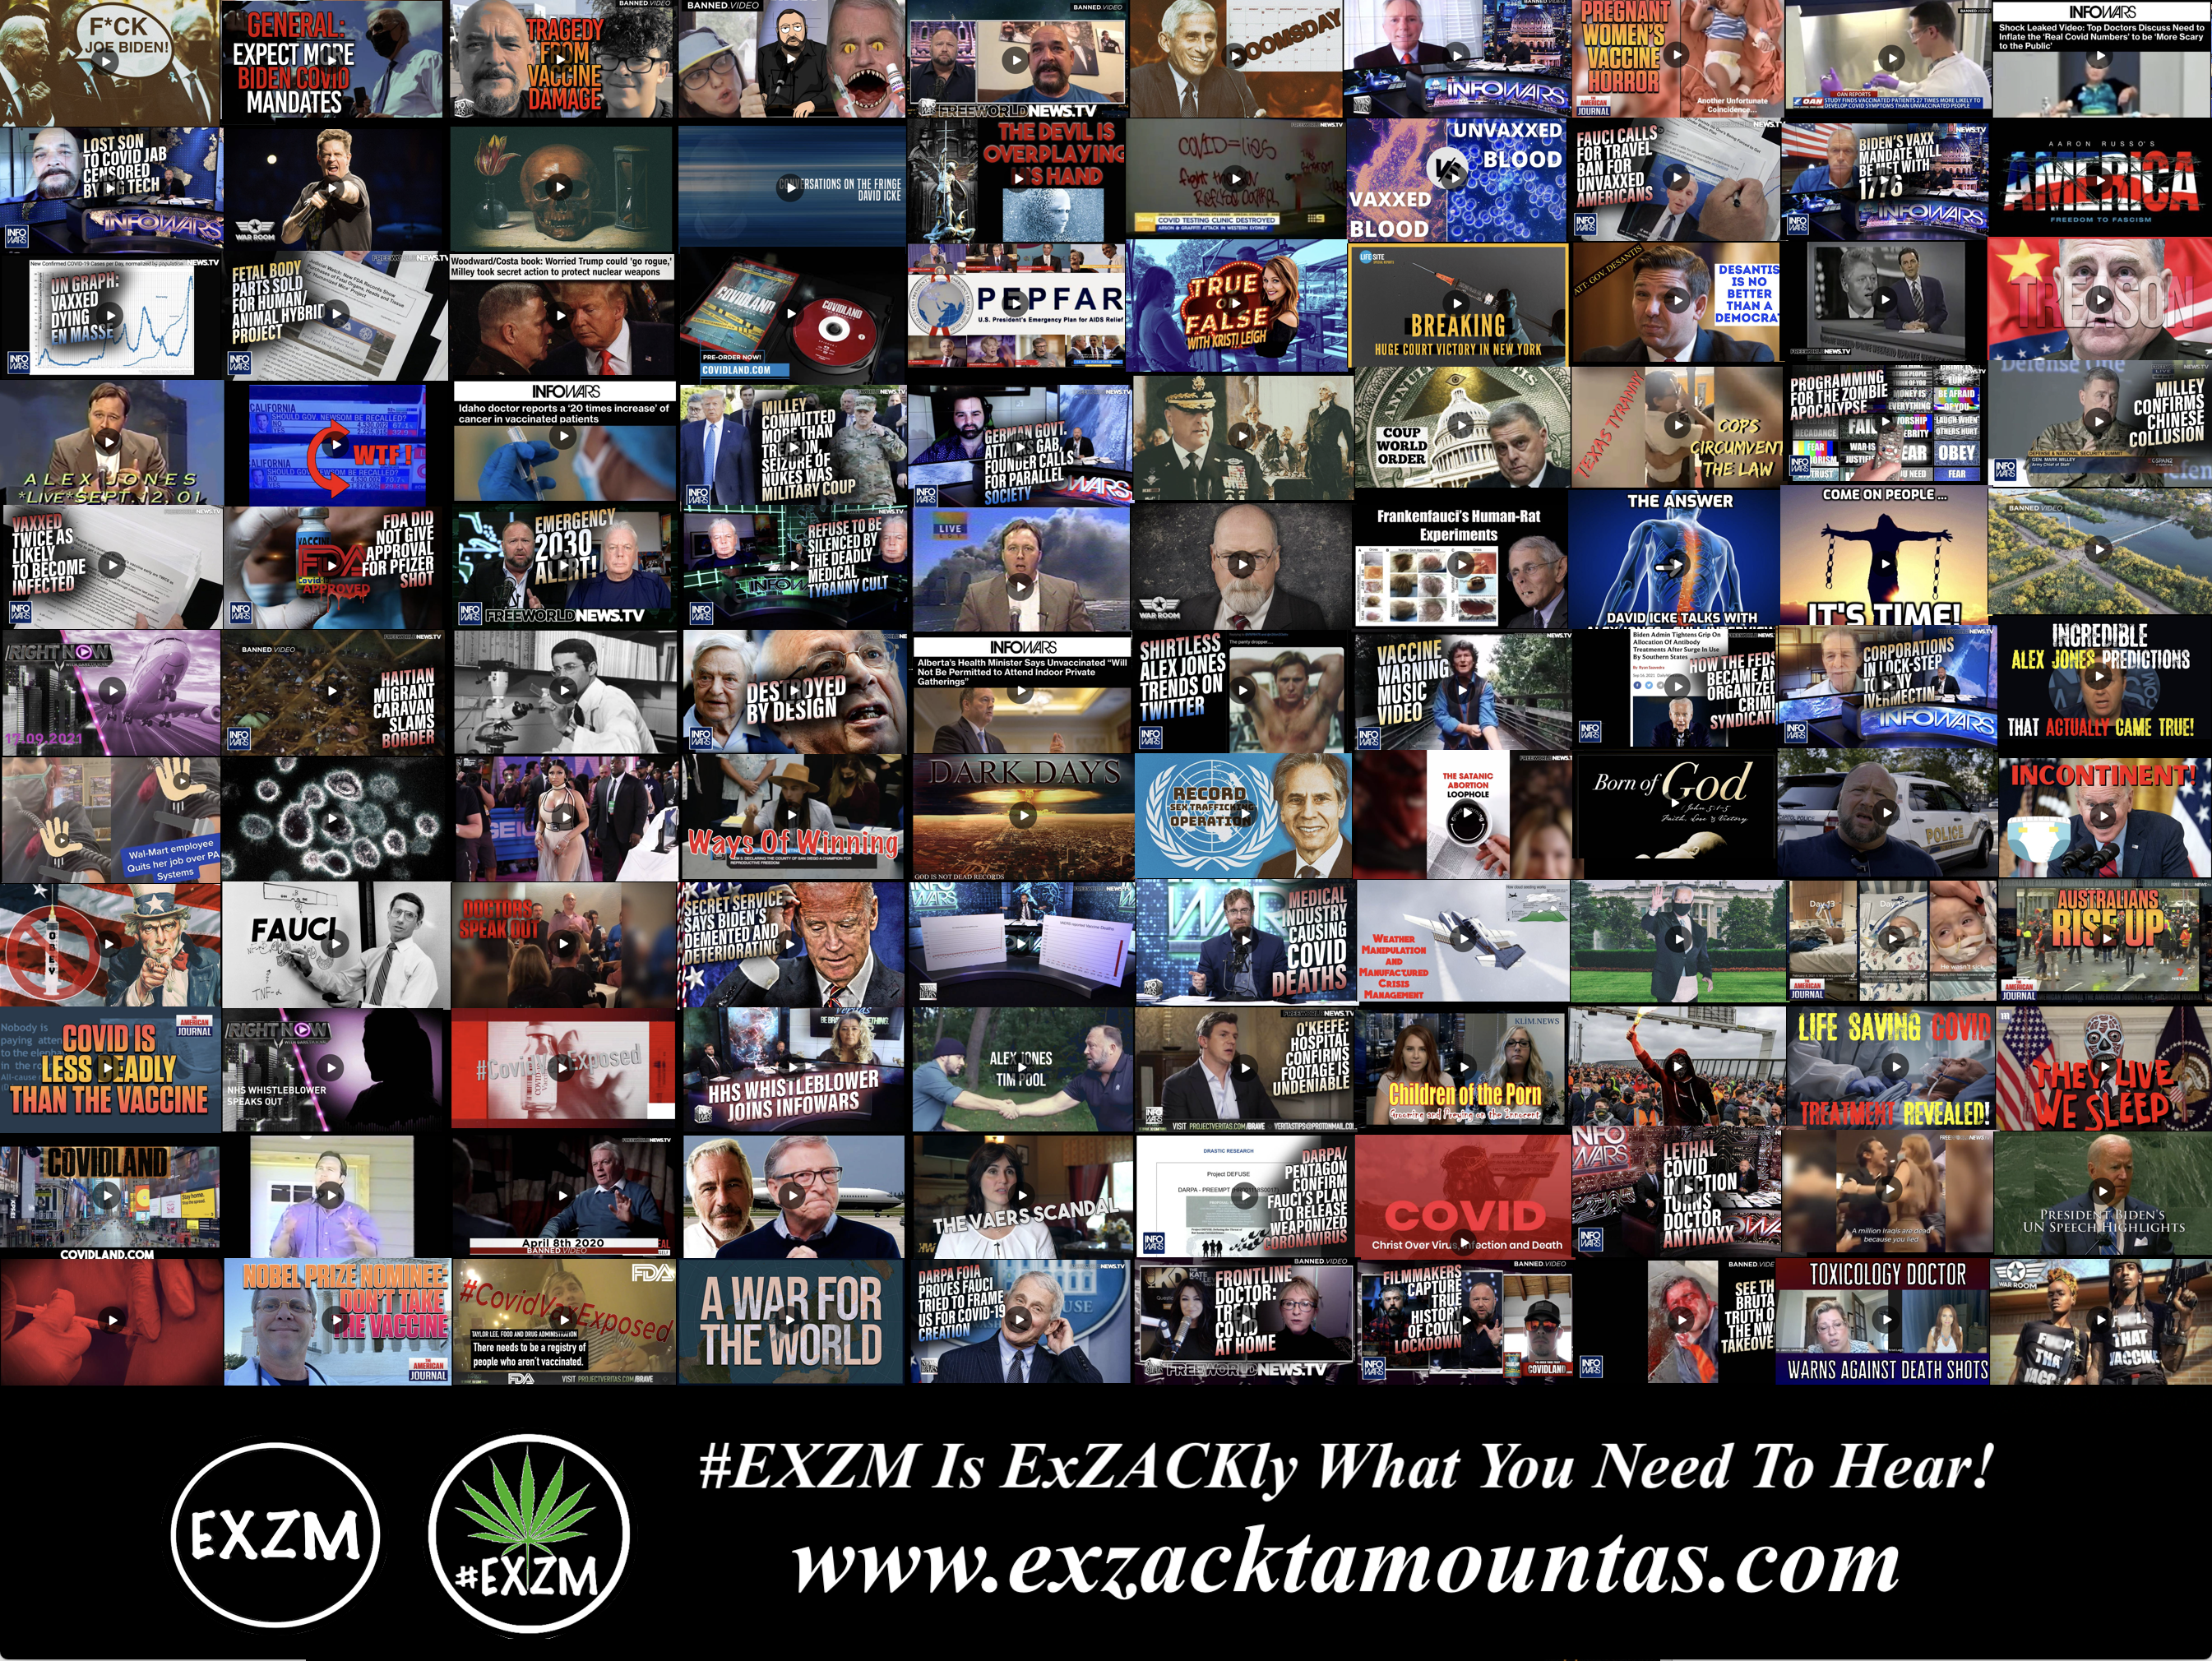 MOST WATCHED VIDEOS ON BANNED VIDEO DEEP STATE GLOBALISTS DEPOPULATION ELECTION FRAUD AND MUCH MORE EXZM Zack Mount September 29th 2021 page 5